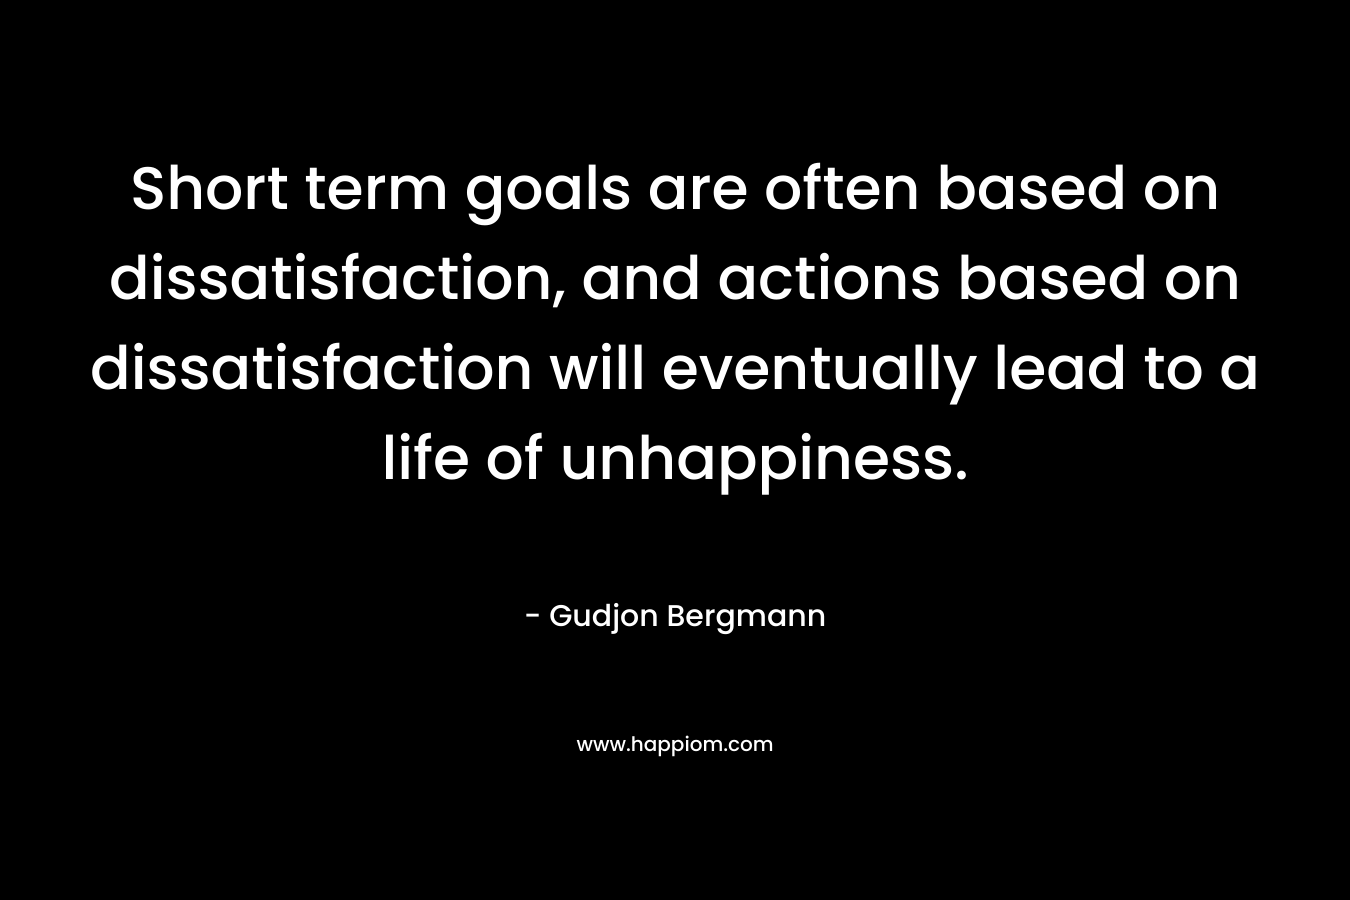 Short term goals are often based on dissatisfaction, and actions based on dissatisfaction will eventually lead to a life of unhappiness.